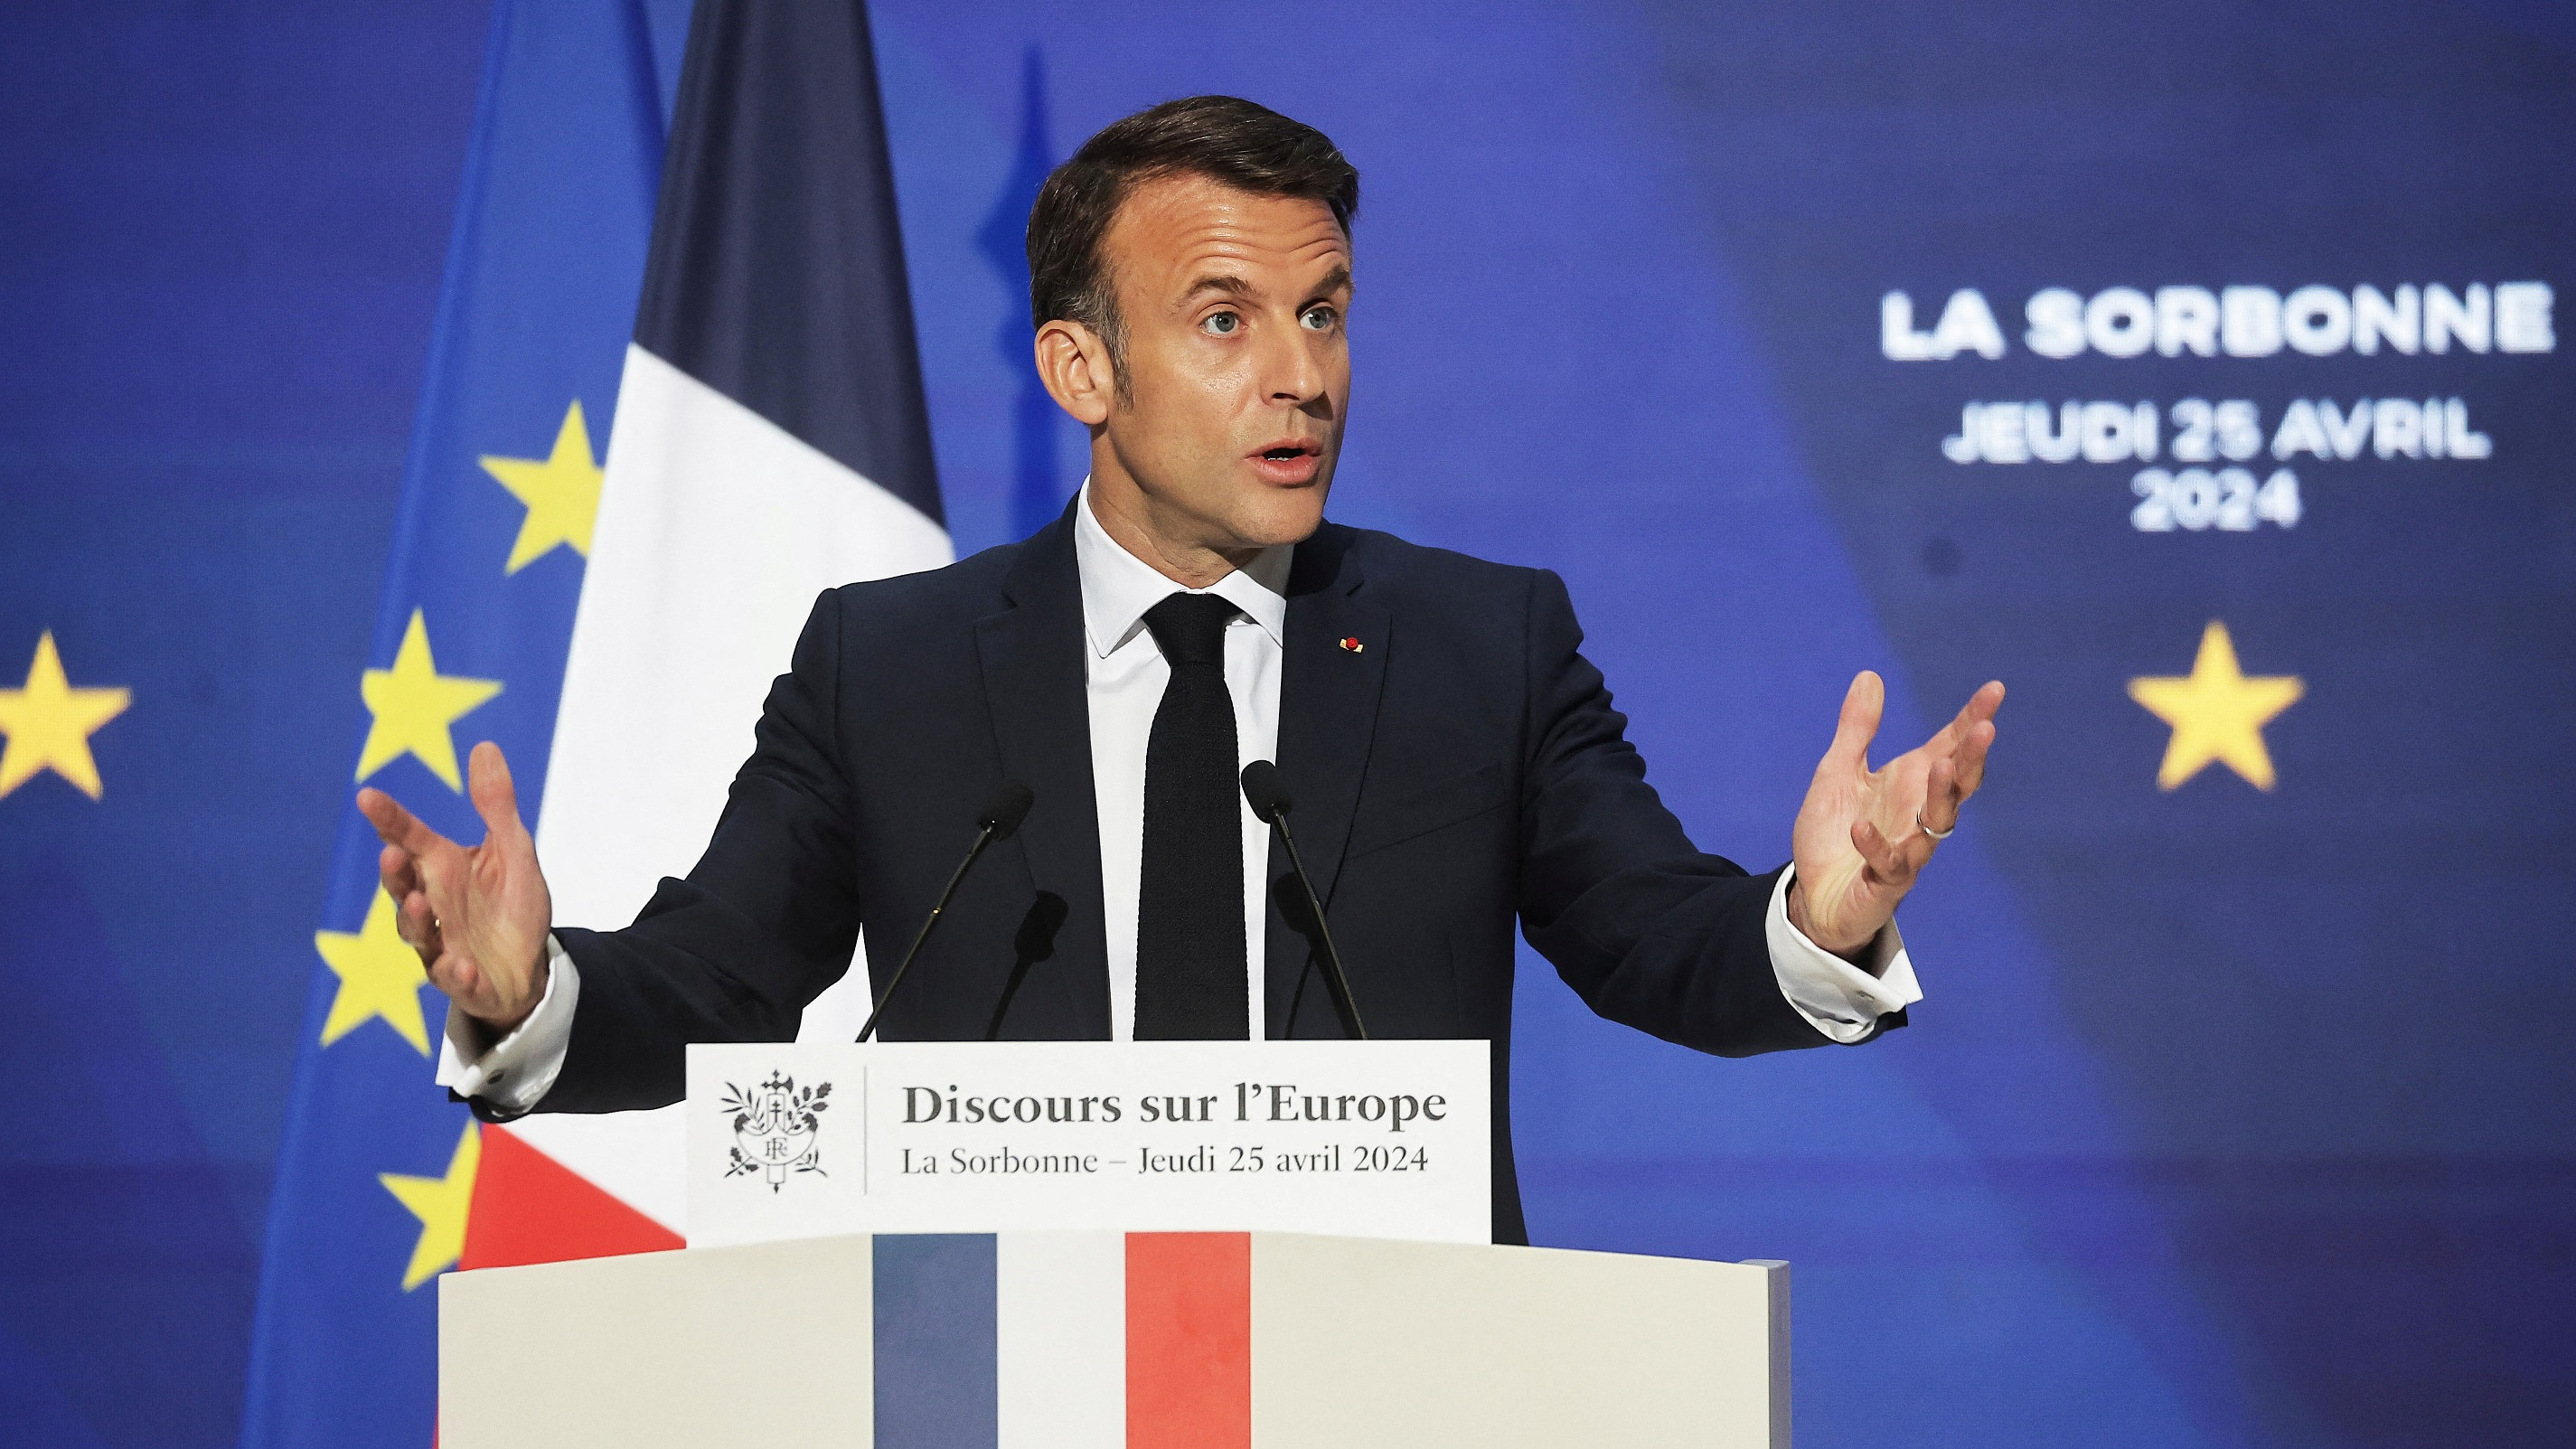 “Deadly Europe”, “economic decline”, immigration… What to remember from Emmanuel Macron’s speech at the Sorbonne